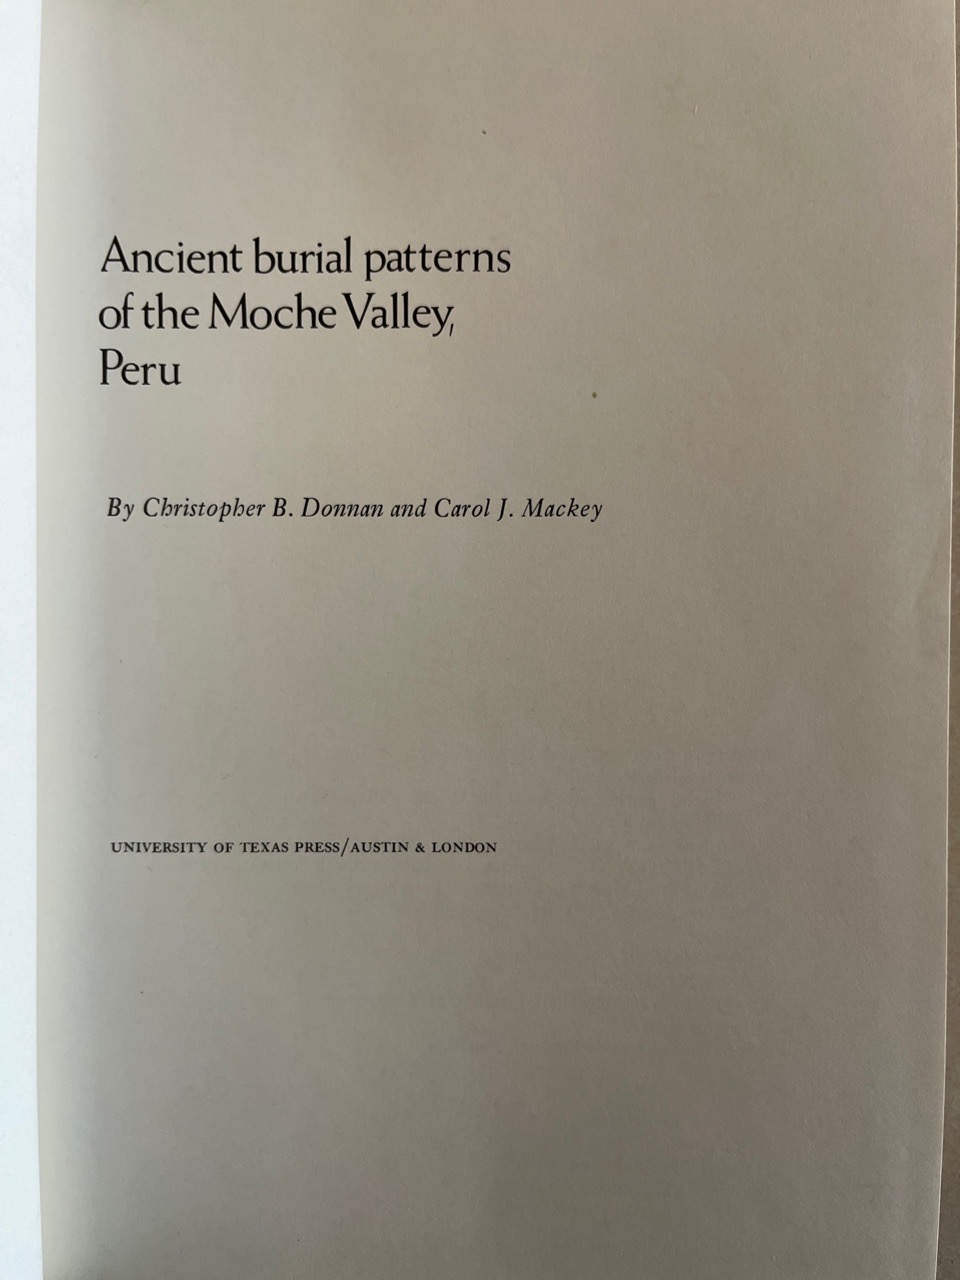 Ancient Burial Patterns of the Moche Valley, Peru. - Donnan, Christopher B. and Carol J. MacKey